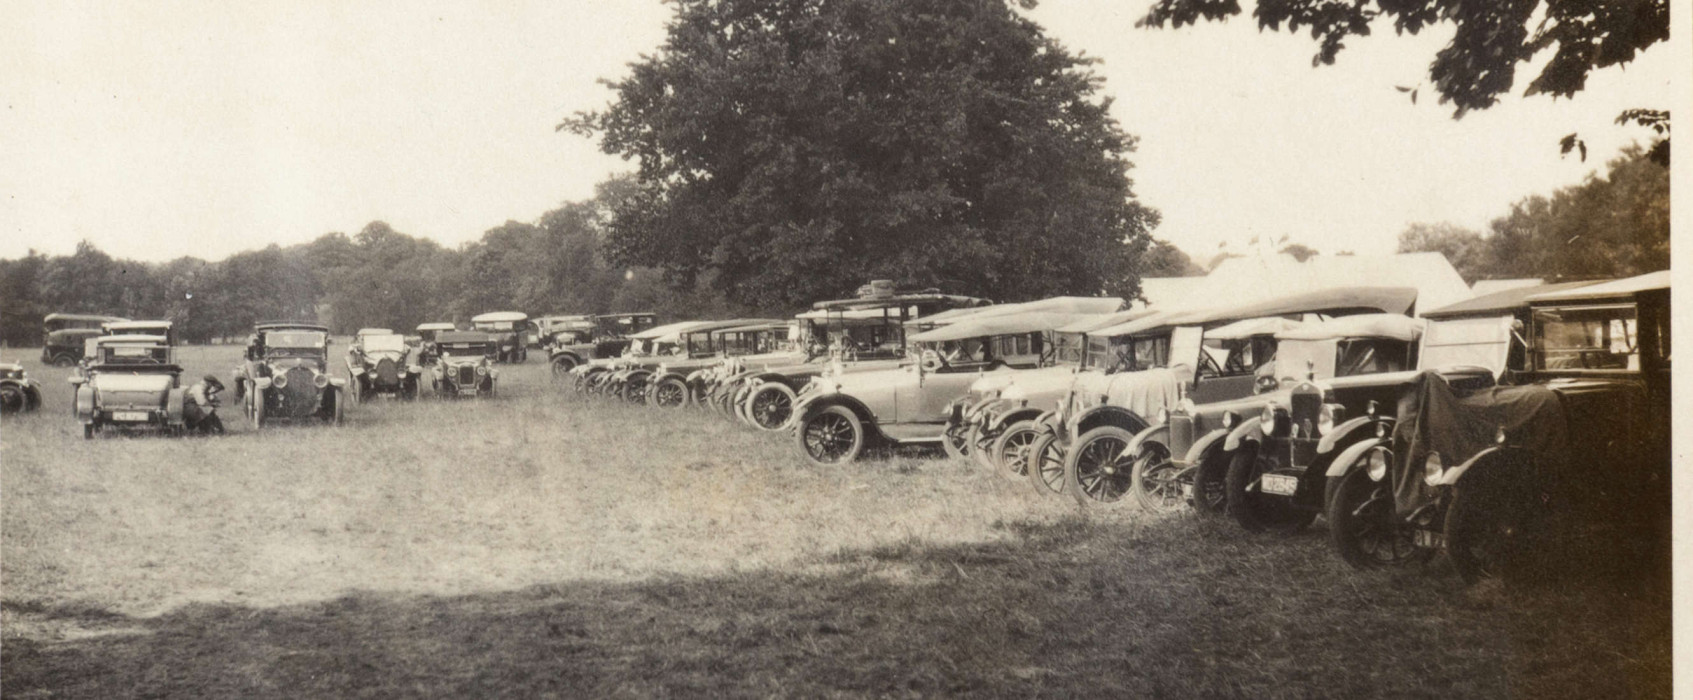 Rows of old cars in a field at Henley Regatta 1923 ref. DEX2784/1/1/1